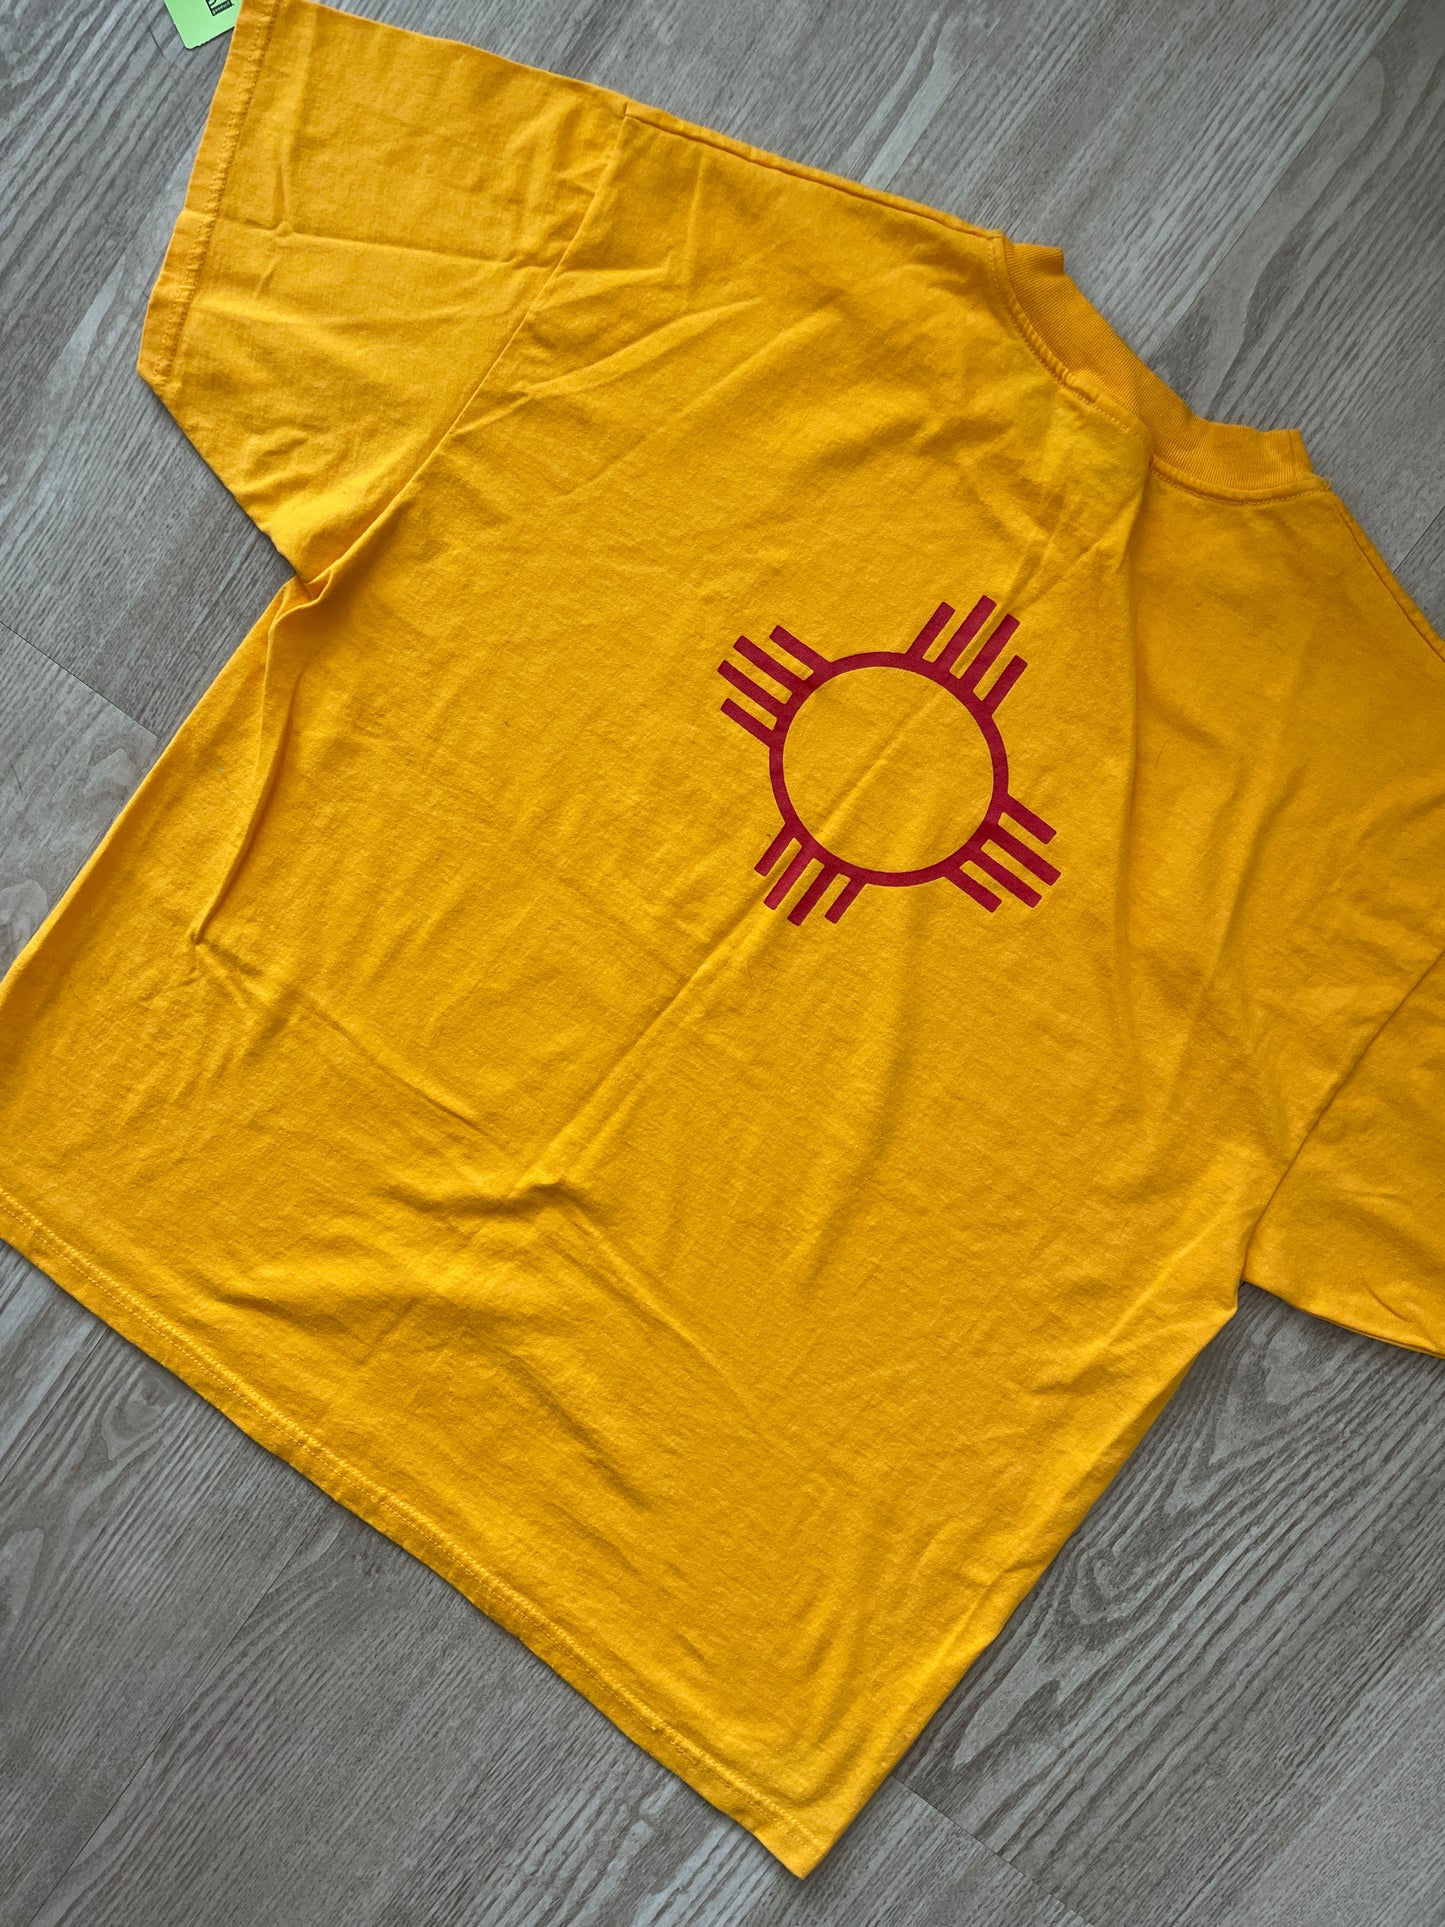 Medium Men's Yellow and Red New Mexico Zia Symbol Short Sleeve T-Shirt | READY TO TIE DYE